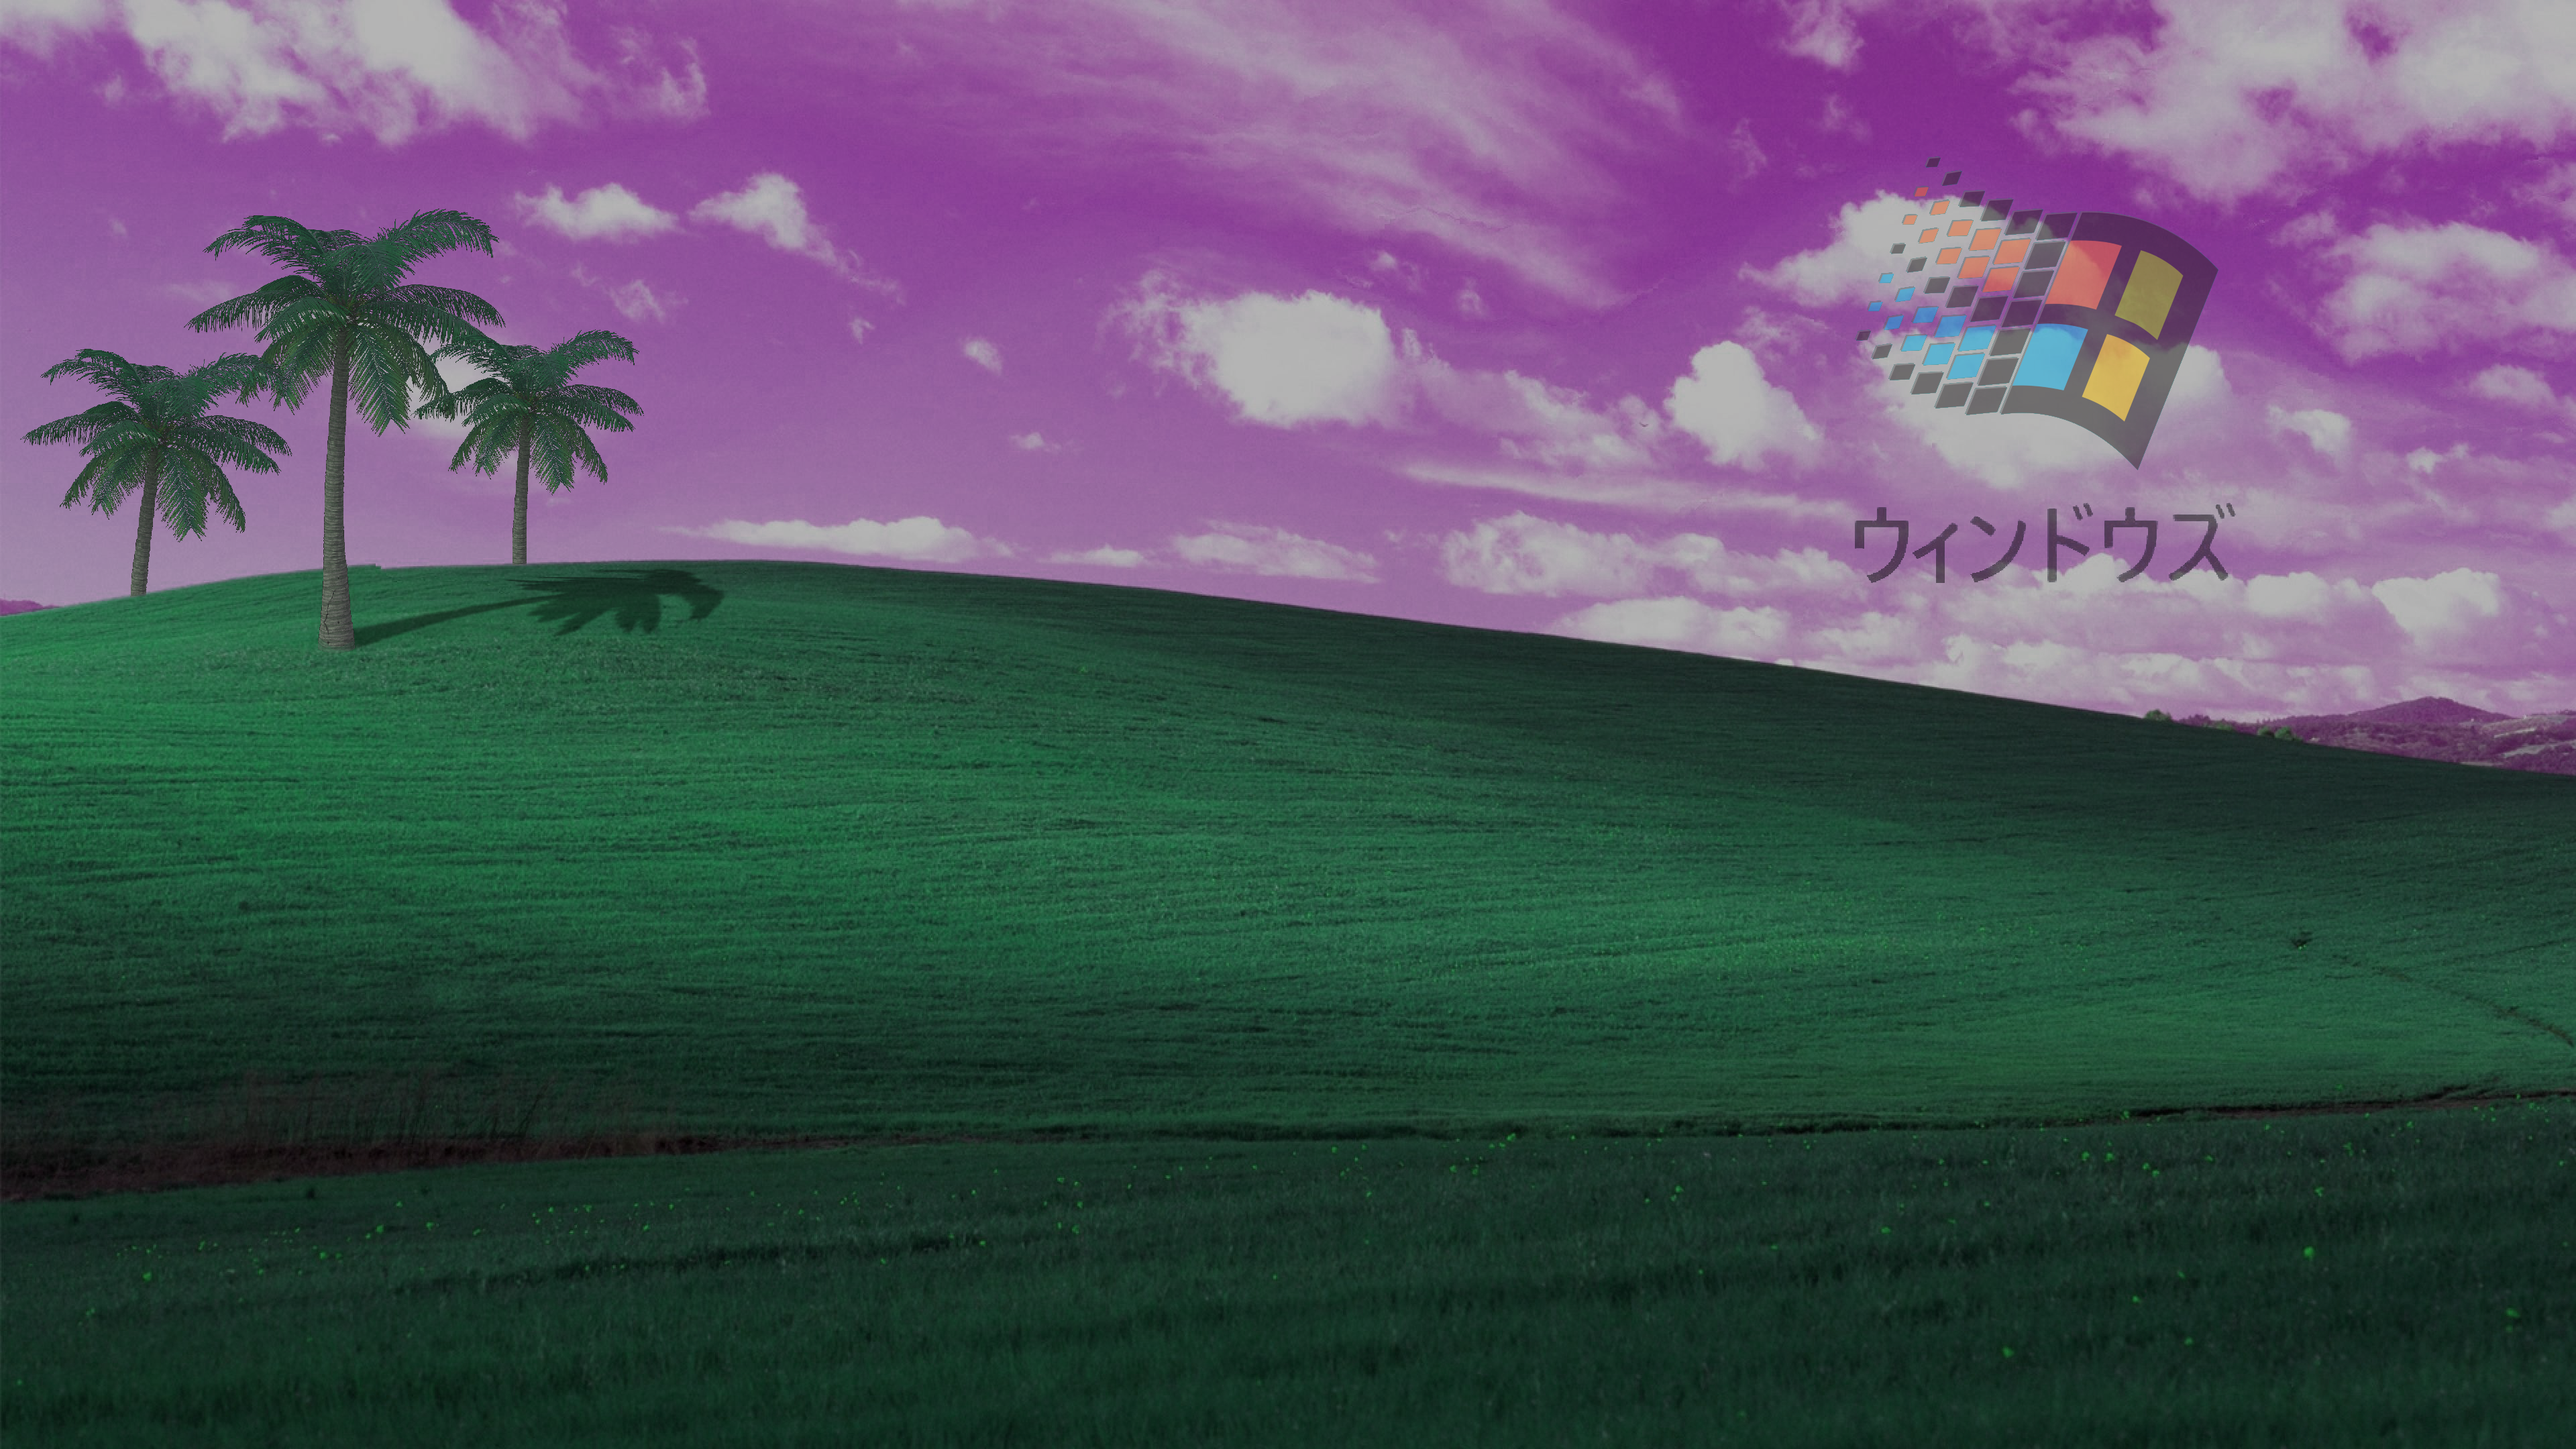 Made a weeb windows wallpaper x puter wallpaper desktop wallpapers vaporwave wallpaper s wallpaper aesthetic